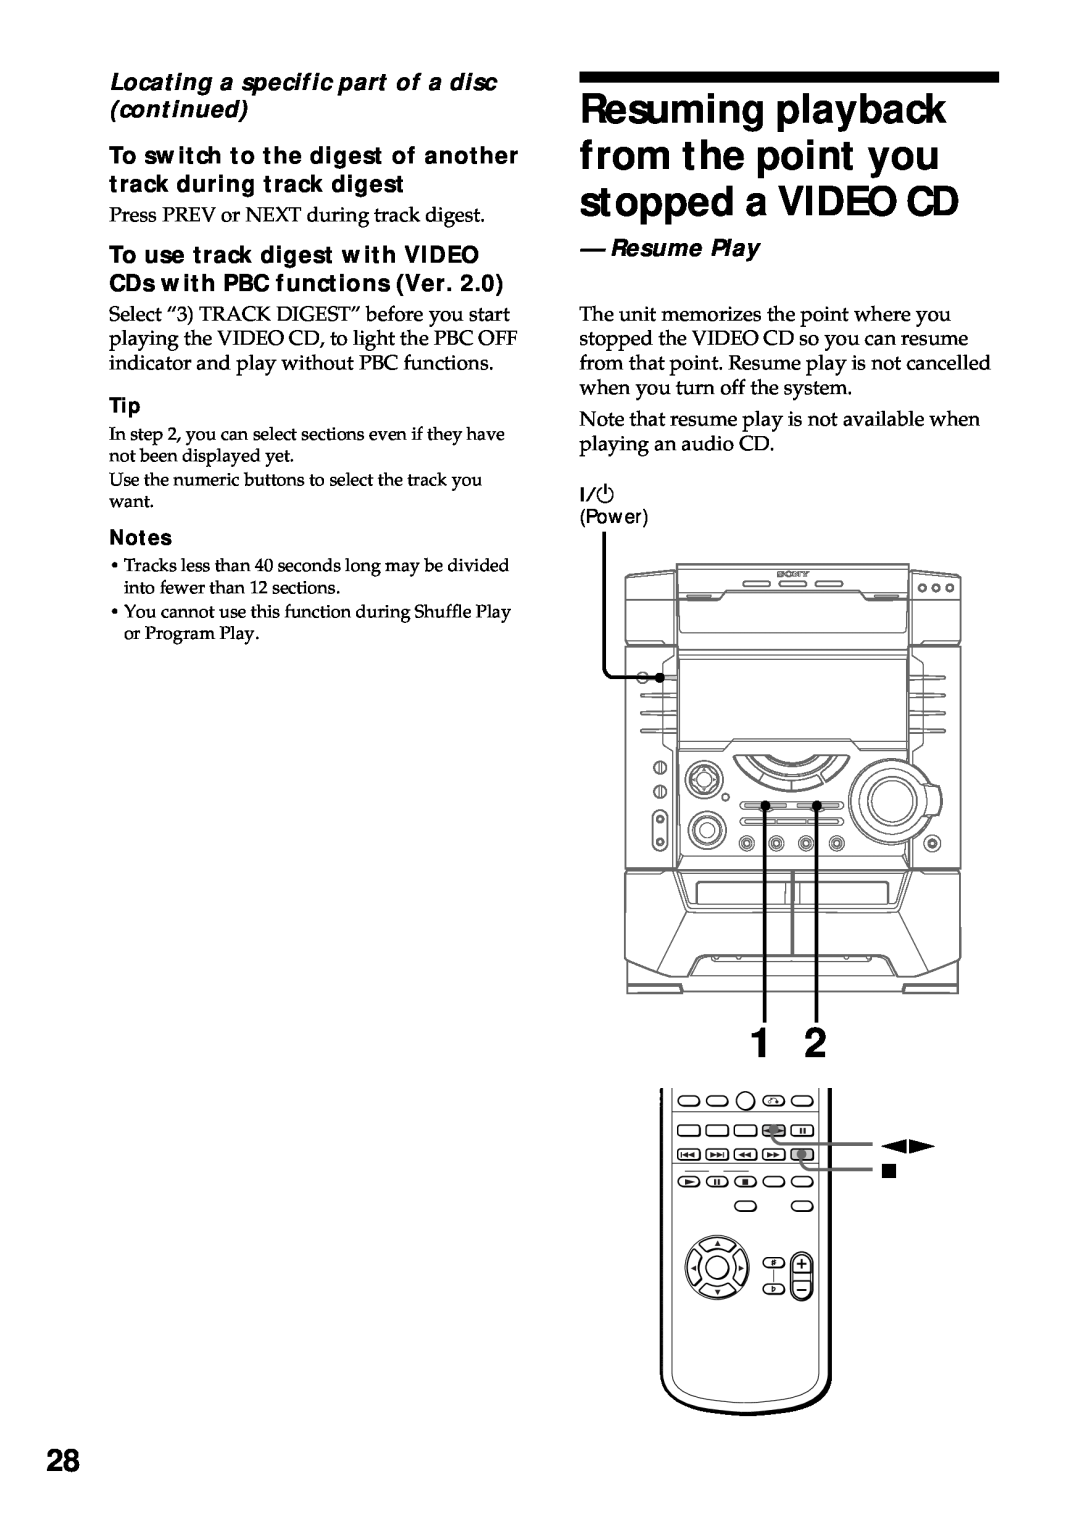 Sony MHC-VX55, MHC-VX77, MHC-VX99 operating instructions Resume Play, Locating a specific part of a disc continued 